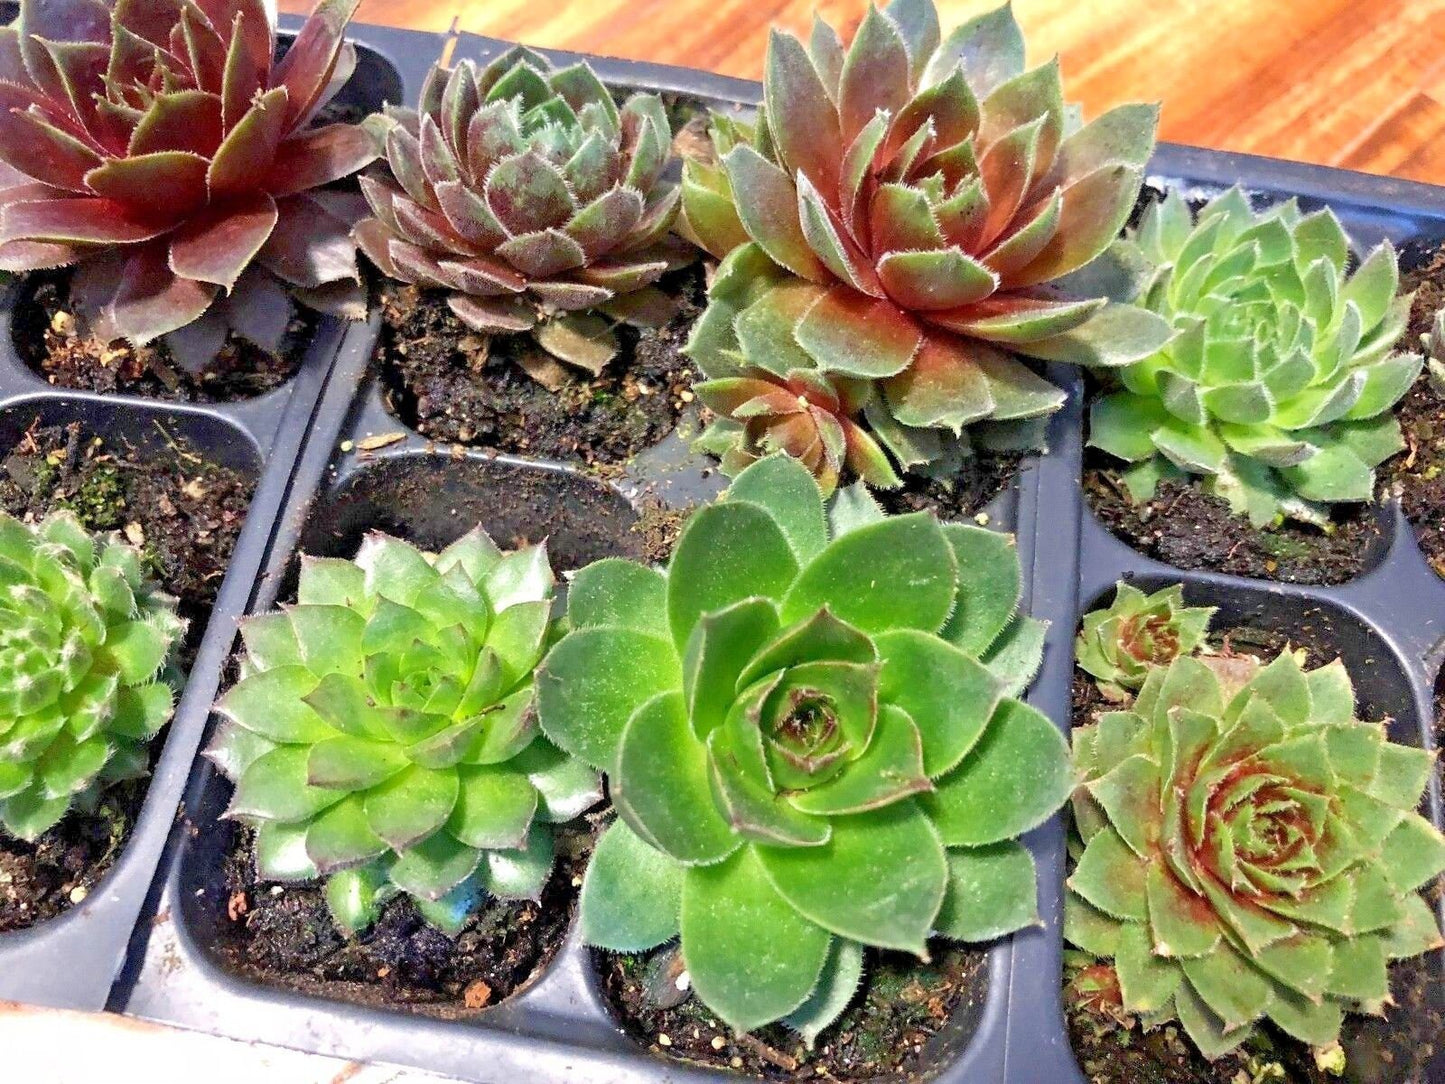 Live Succulents 12 pack of Indoor Outdoor Cold Hardy Hen and Chick Sempervivum Easy Care Plants approx 2" each  Wedding Favors Crafts Gift